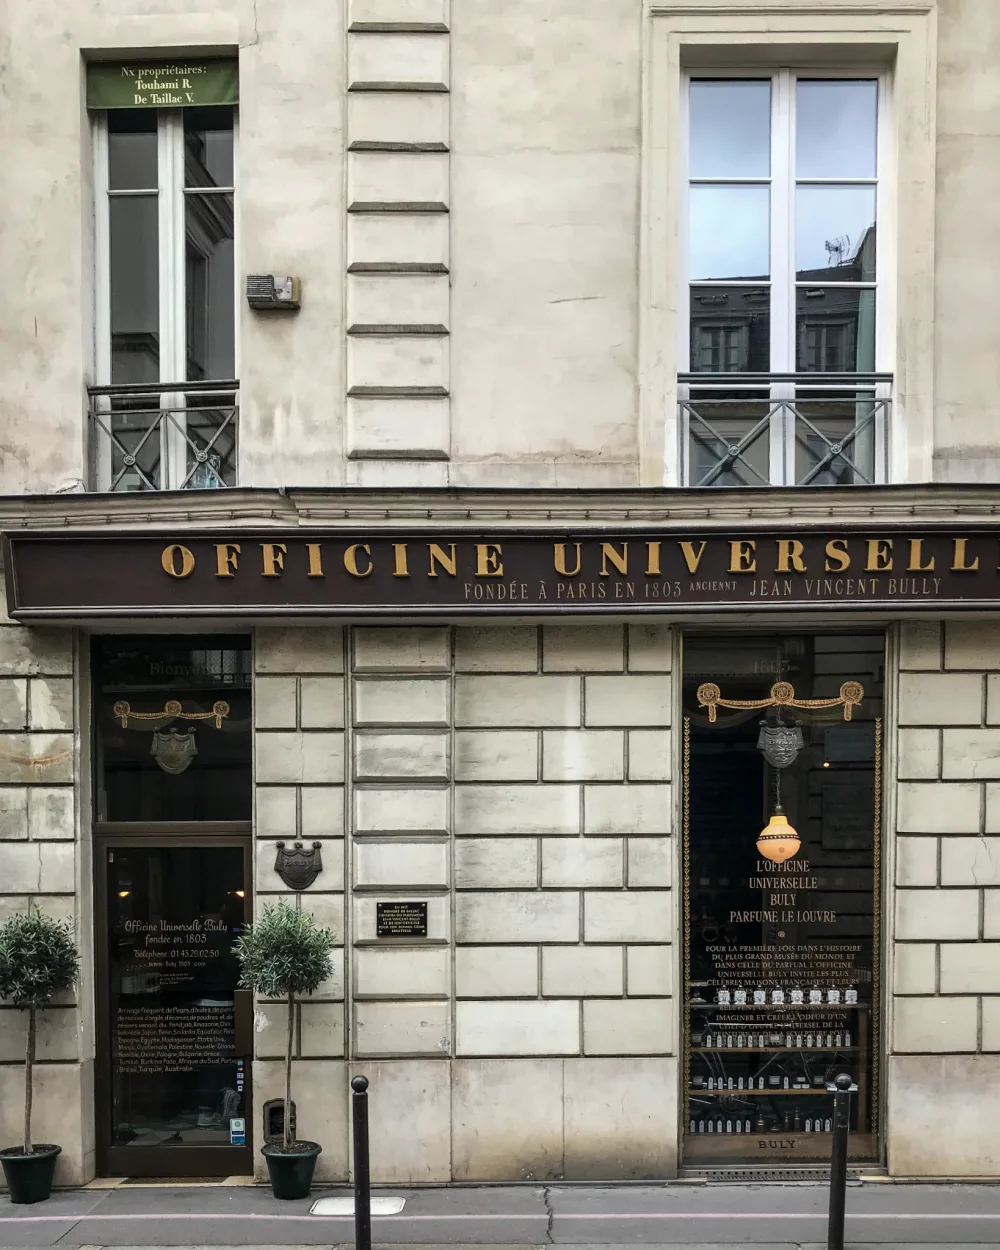 Store Locator – Officine Universelle Buly